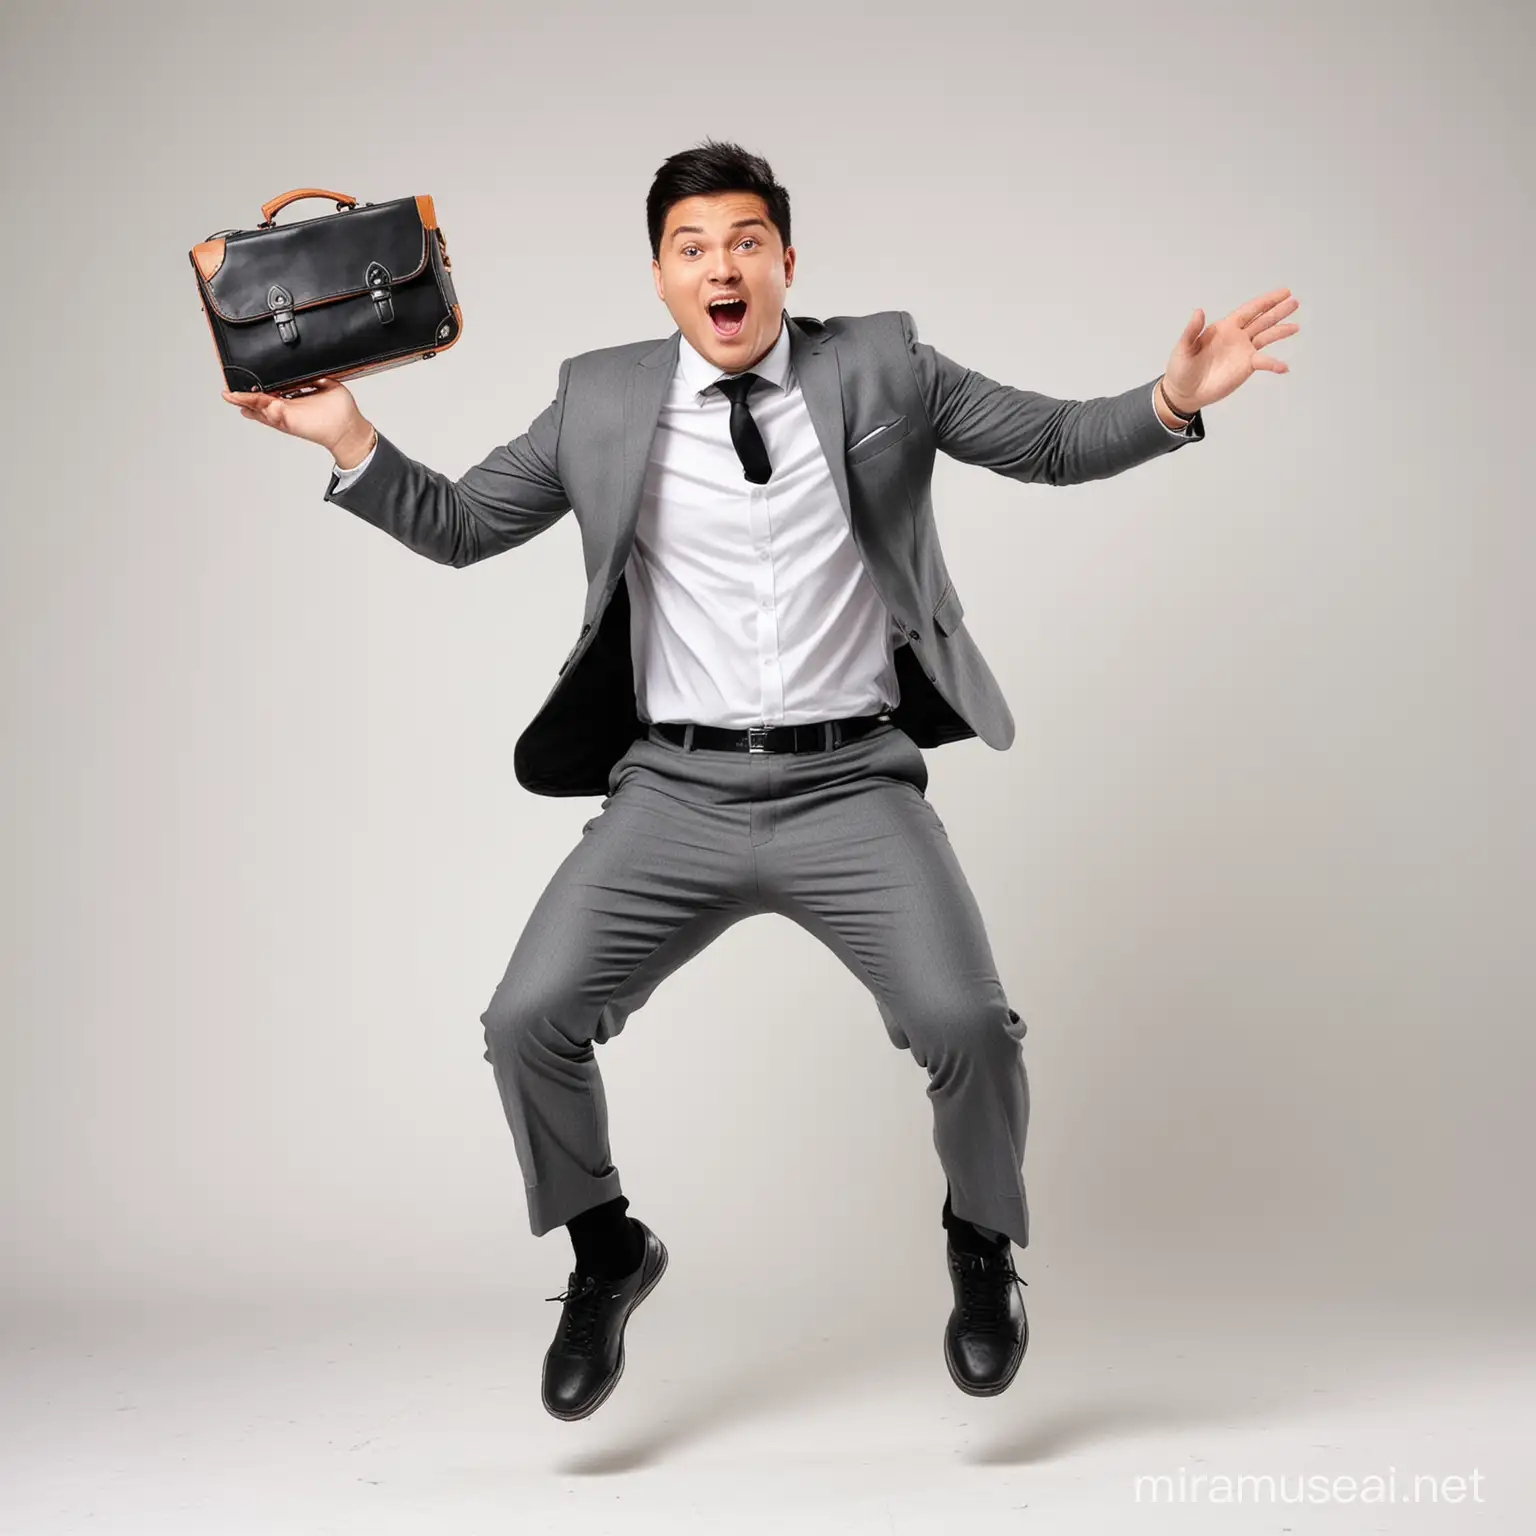 Cheerful Caucasian Man Jumping with Orange Briefcase